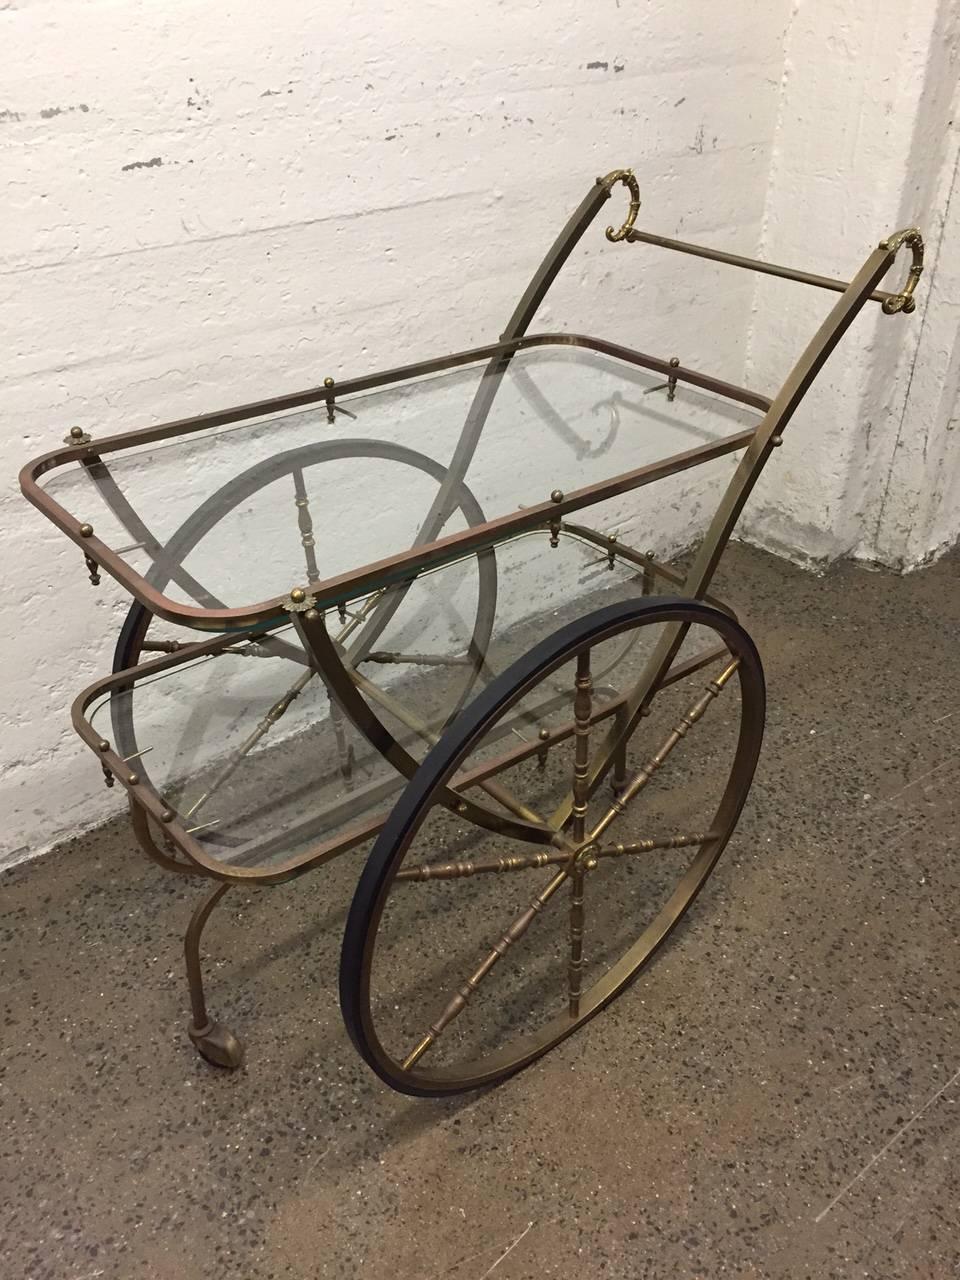 French, two-tier glass and brass bar cart. Large wheels and has original patina.